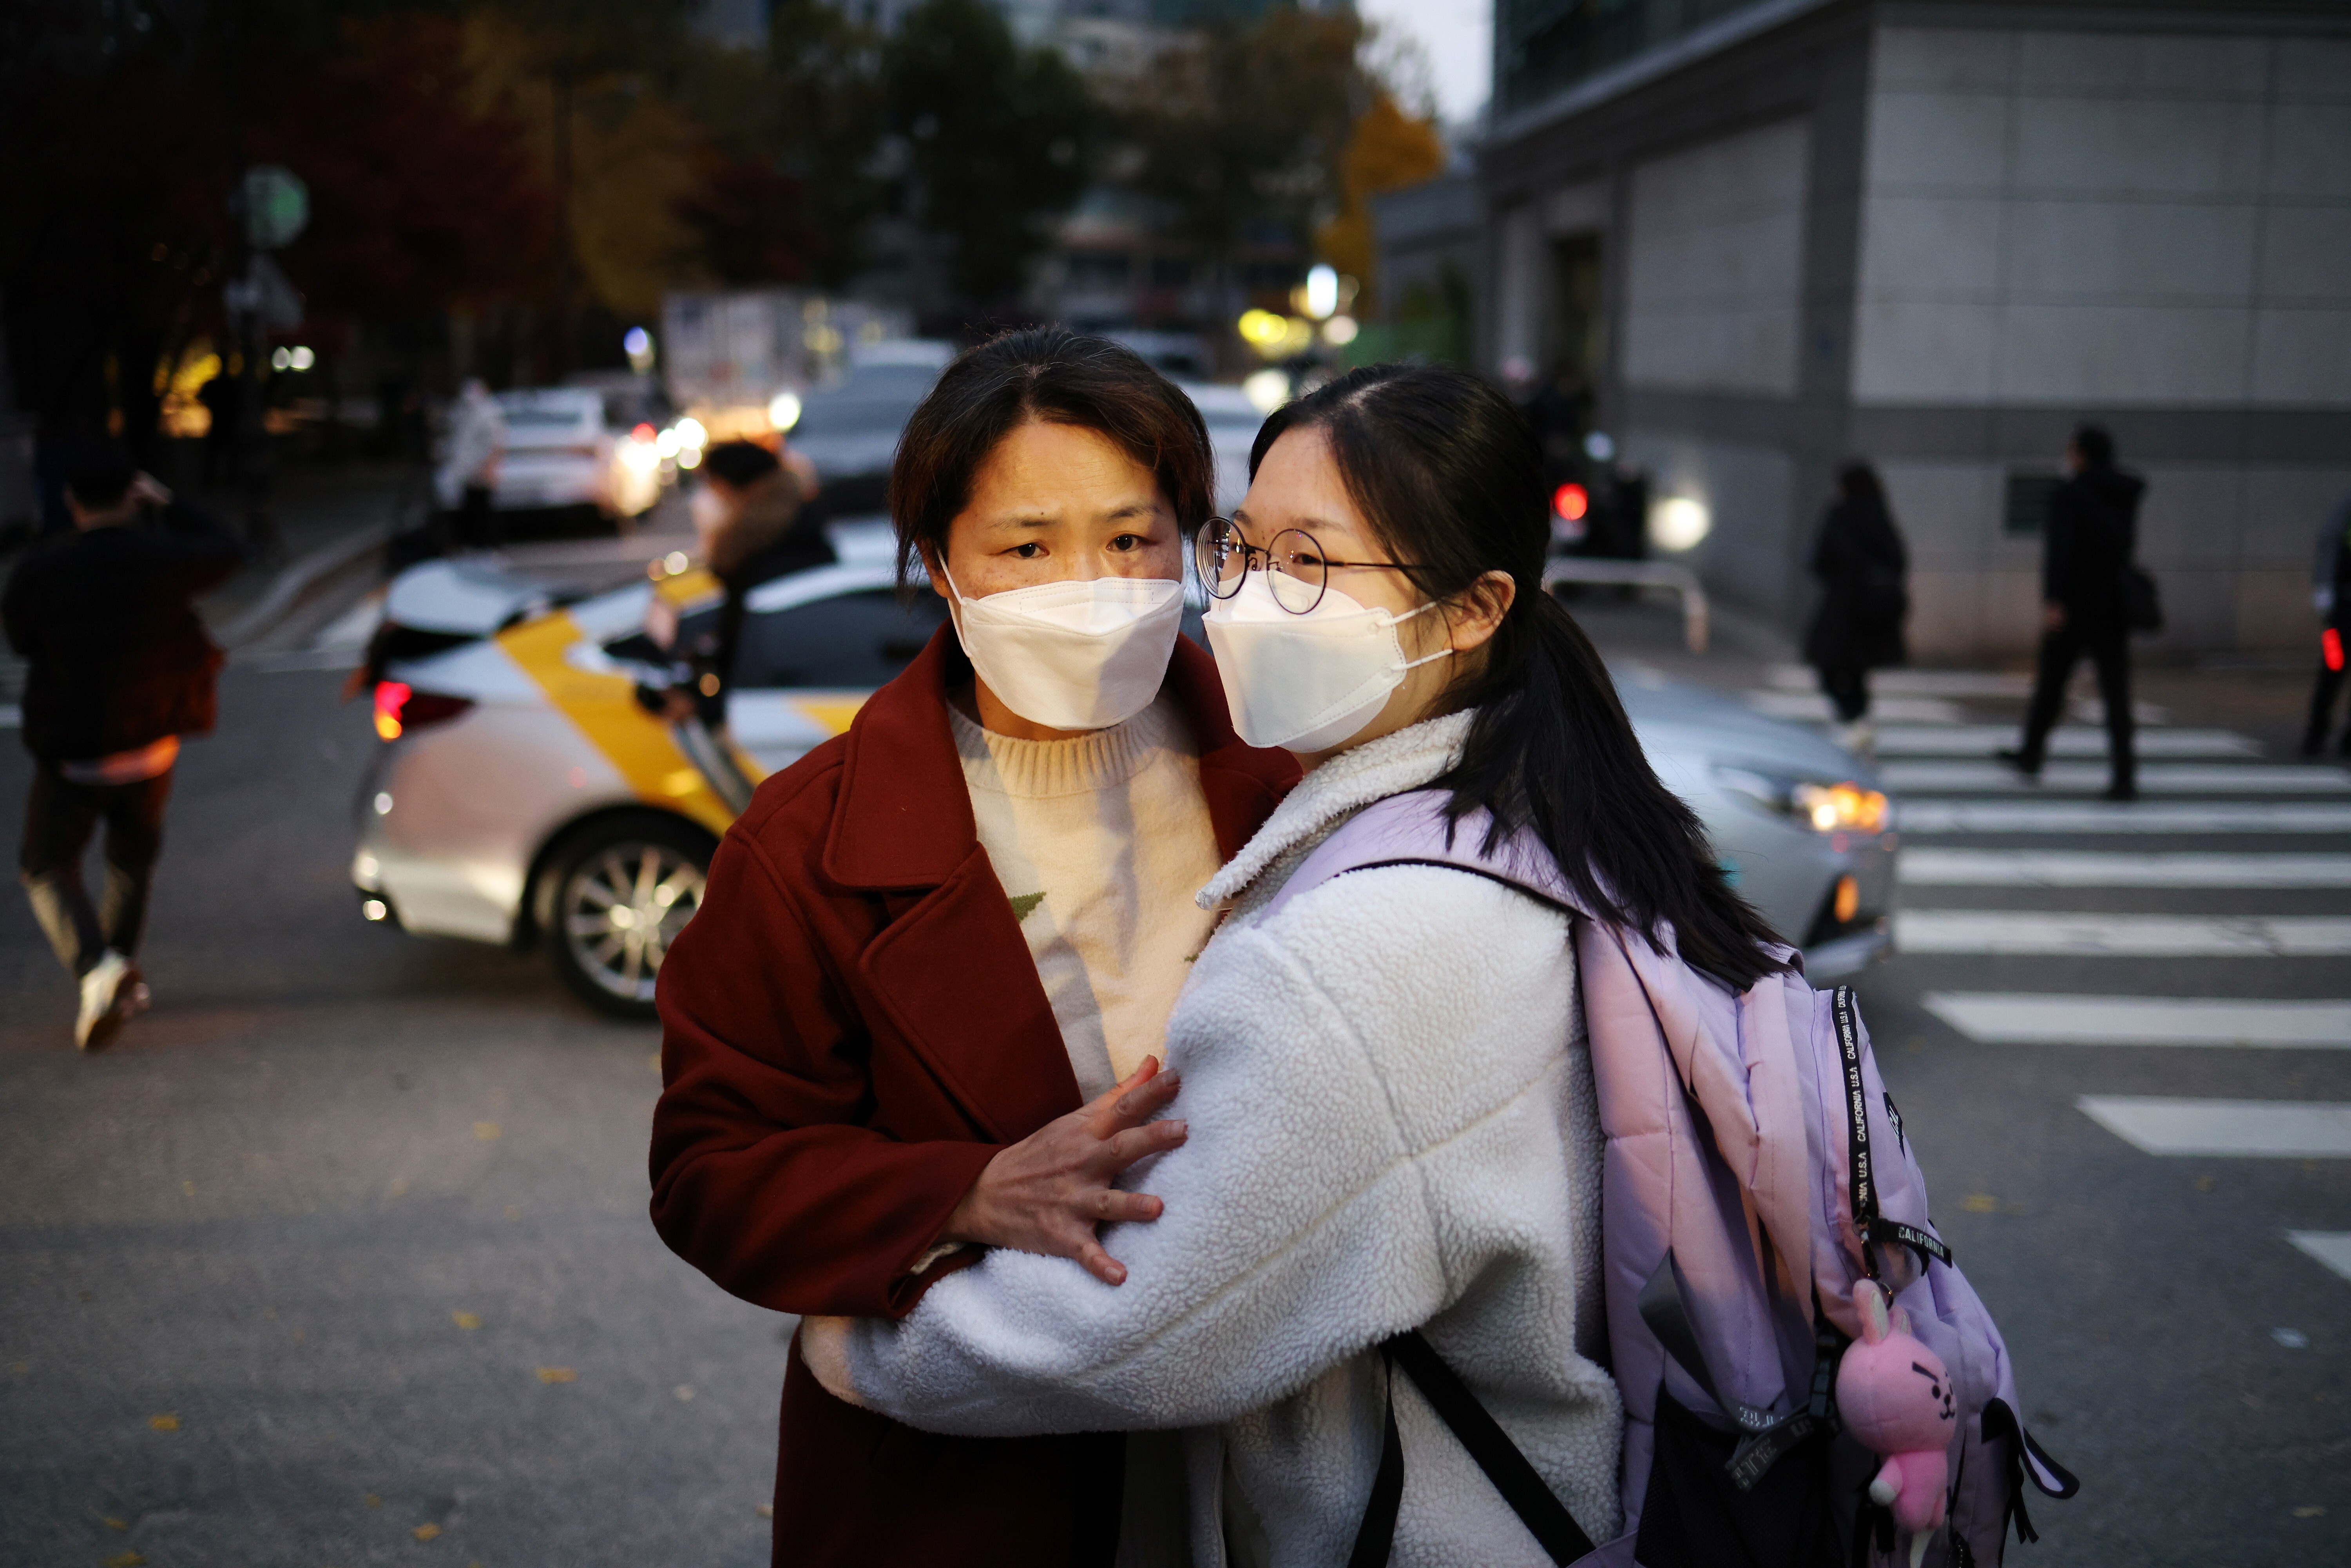 A mother hugs her daughter ahead of her Suneung exams in Seoul on Thursday. Photo: Reuters